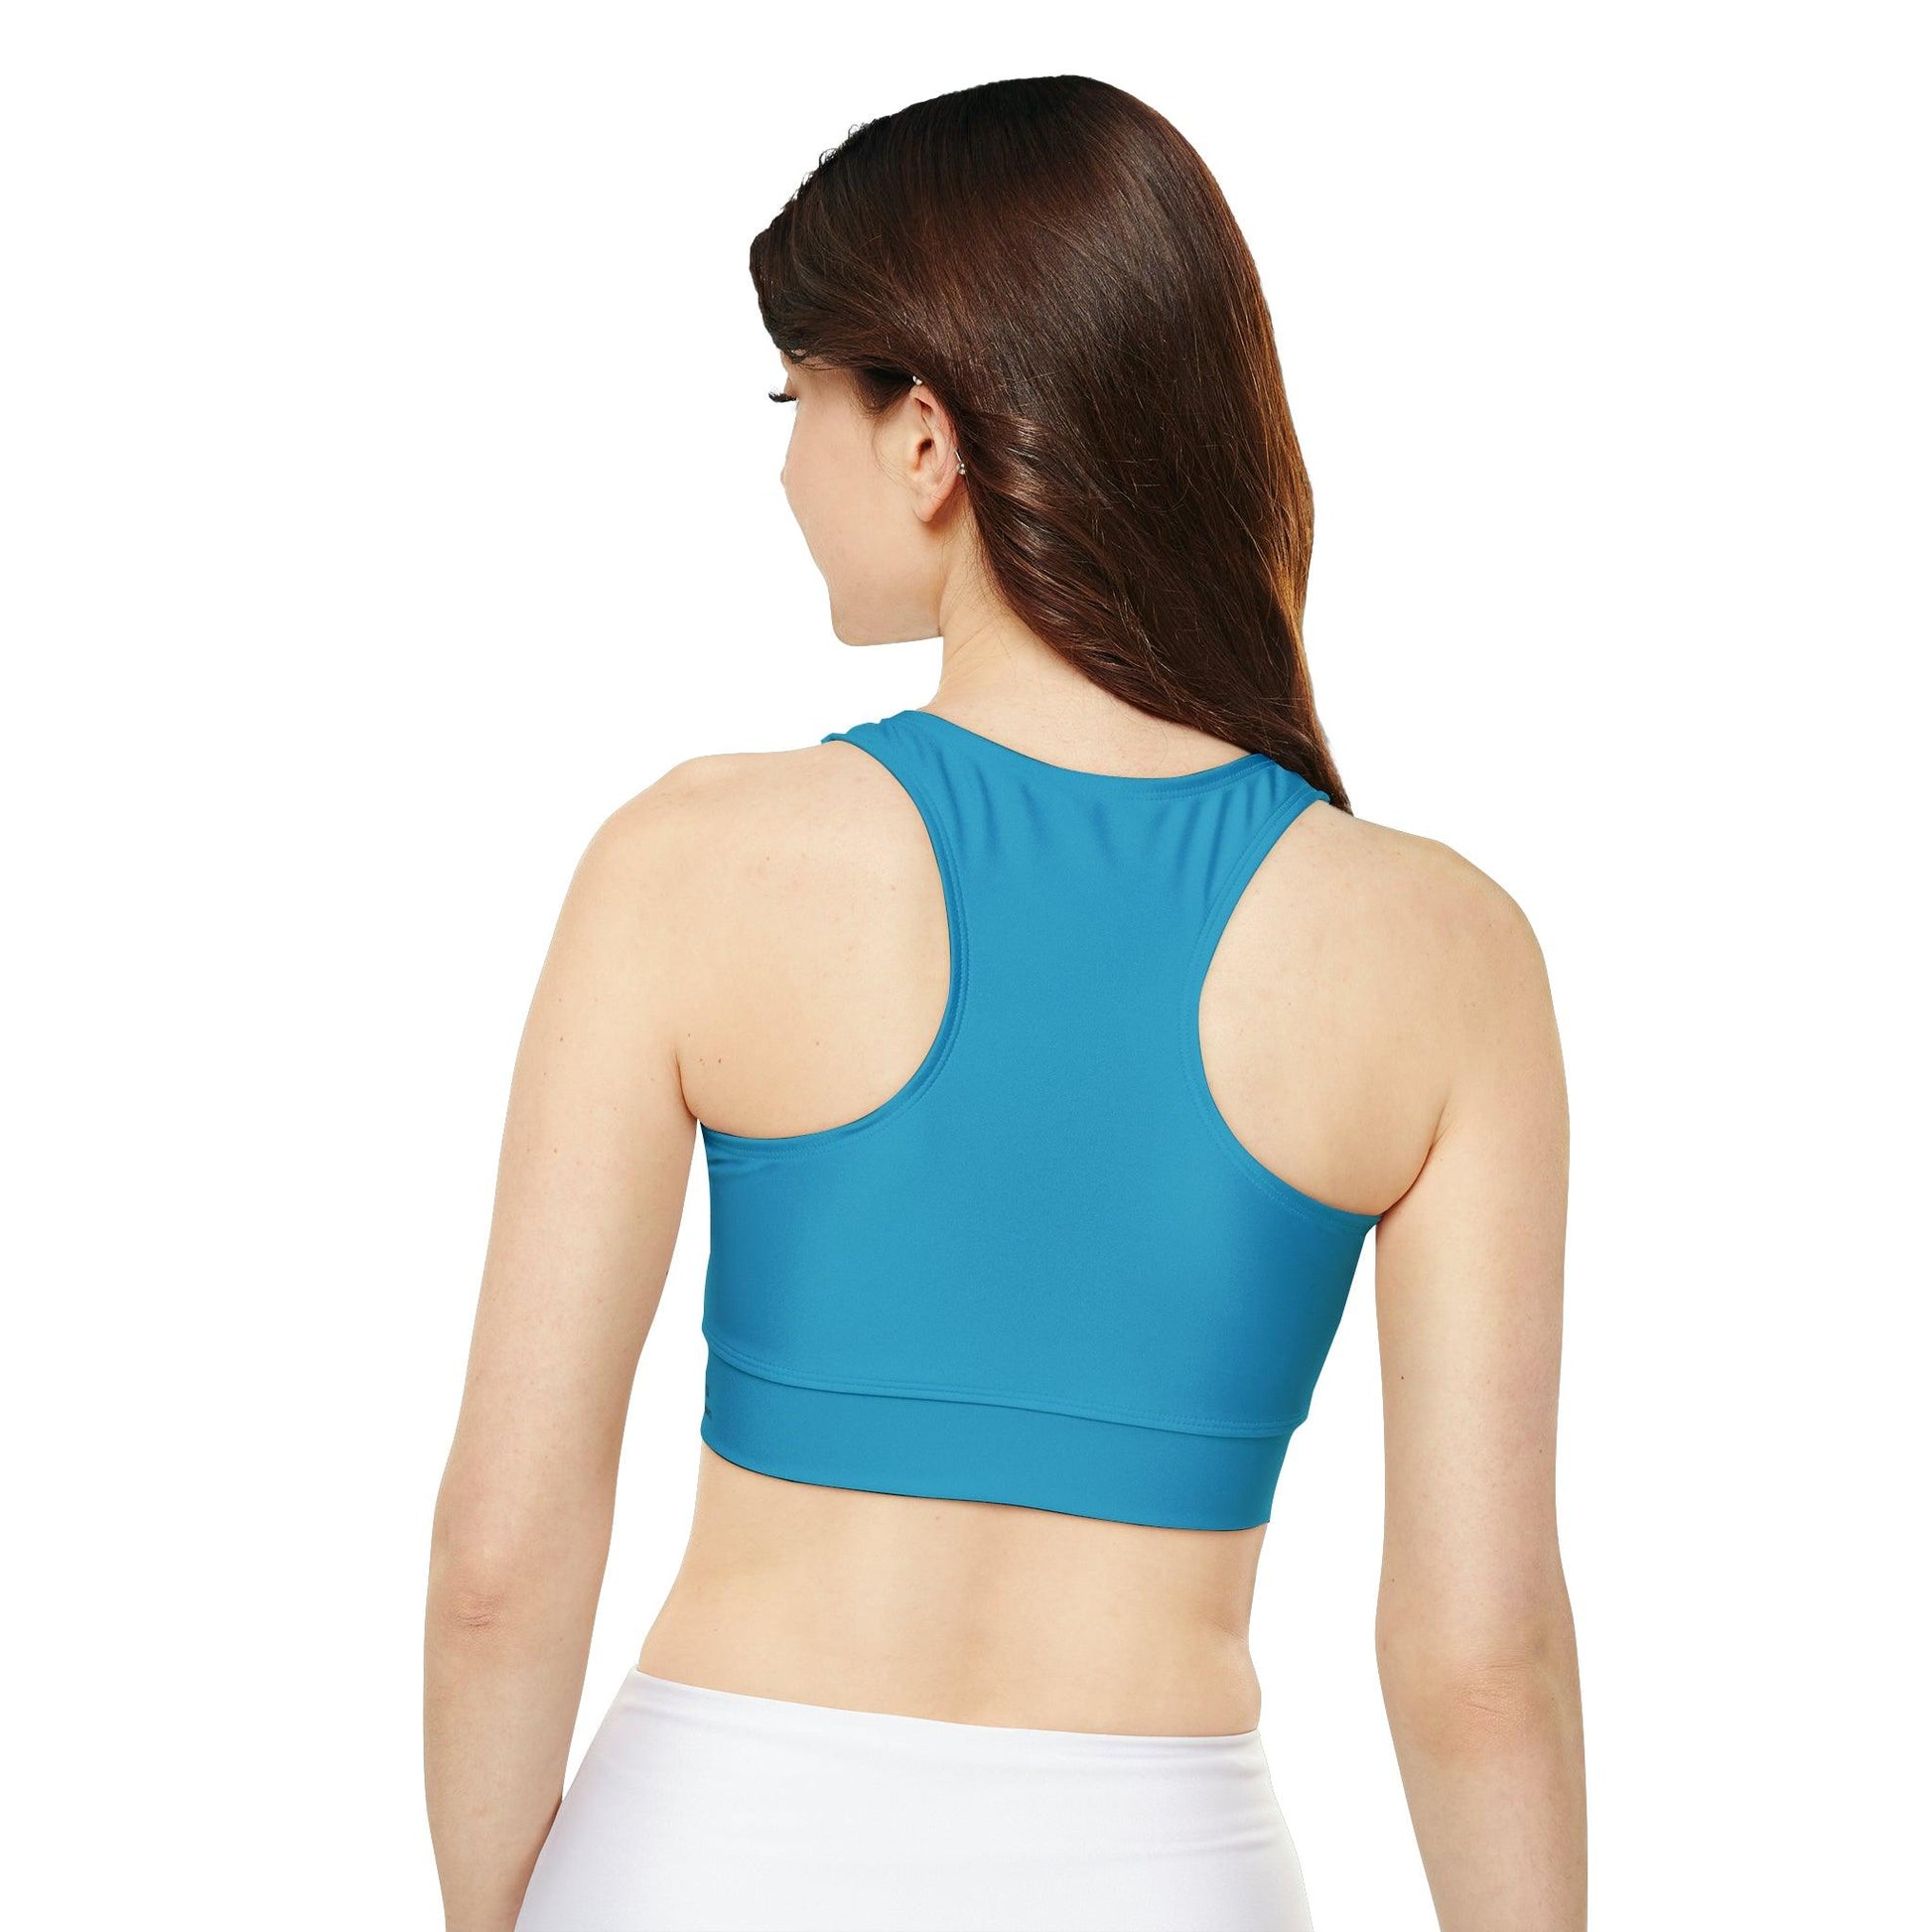 Fully Lined, Turquoise Padded Sports Bra - COFFEEBRE